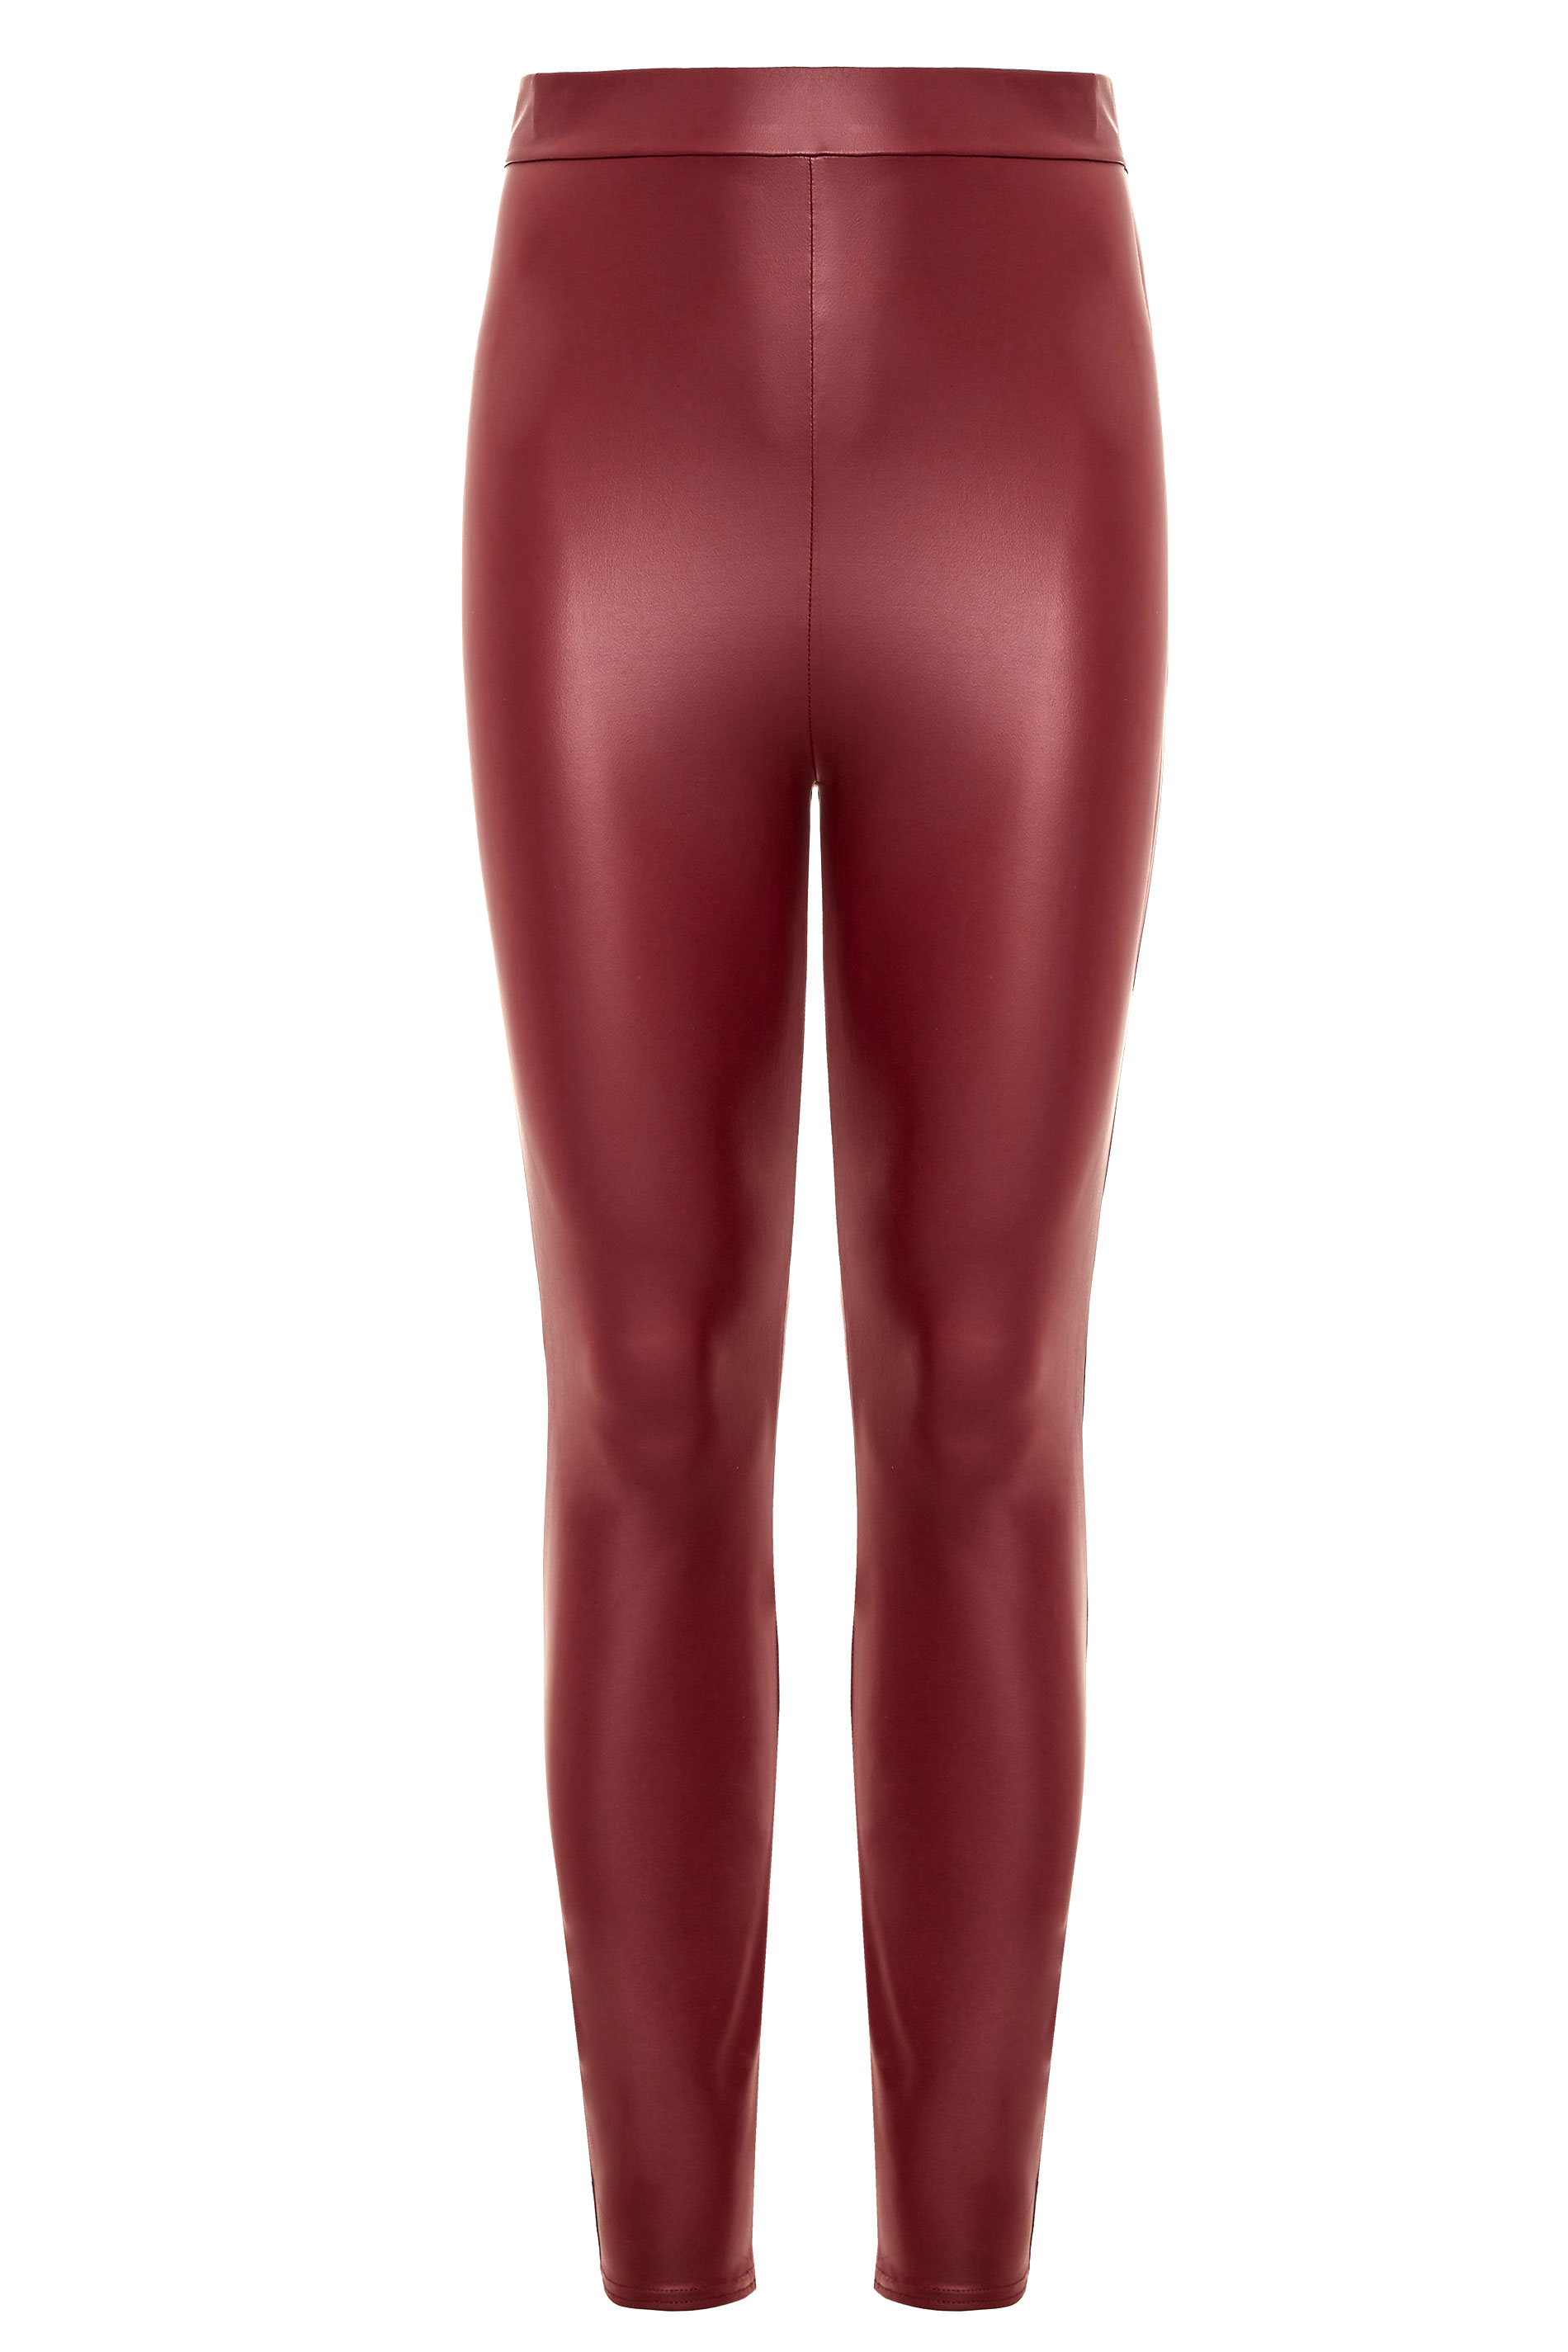 New Look Tall Leather Leggings For Women Size